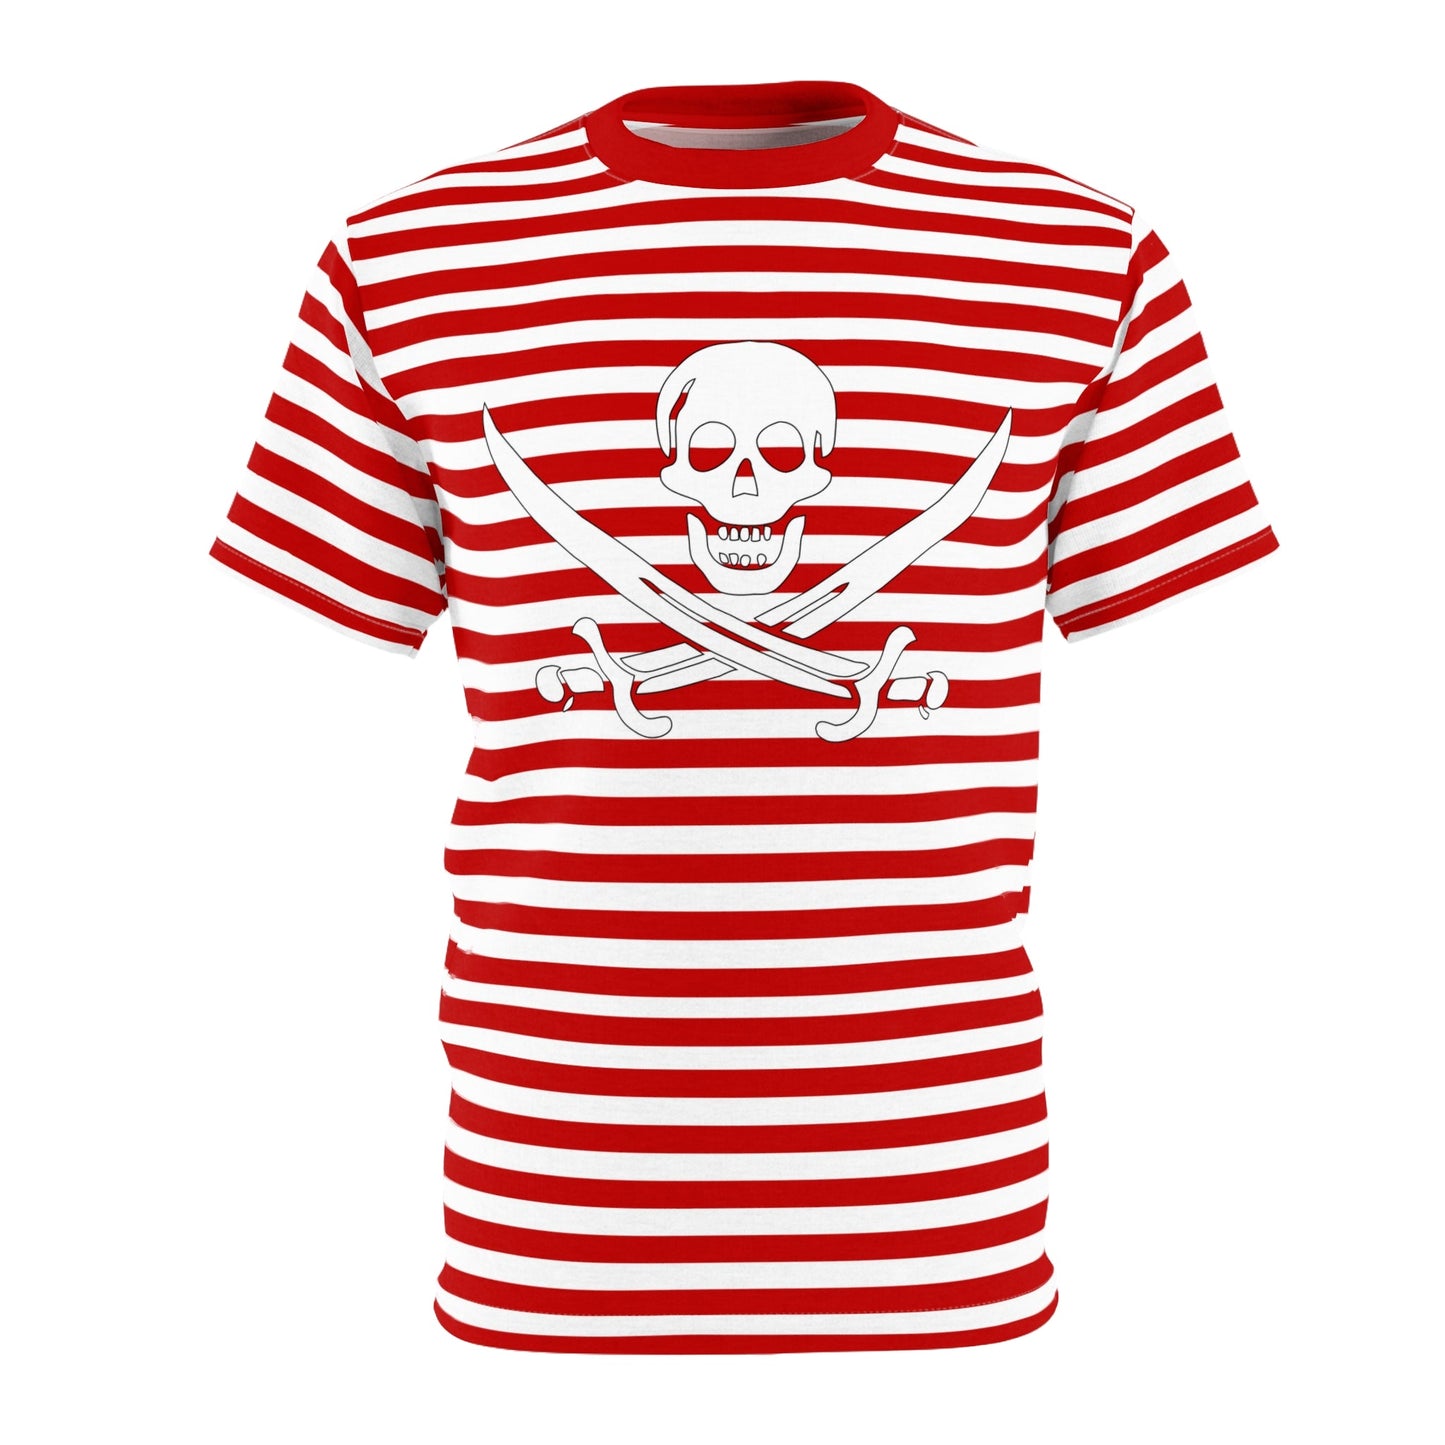 Pirate Night Unisex Cut & Sew Tee All Over PrintAOP ClothingAssembled in the USA#tag4##tag5##tag6#